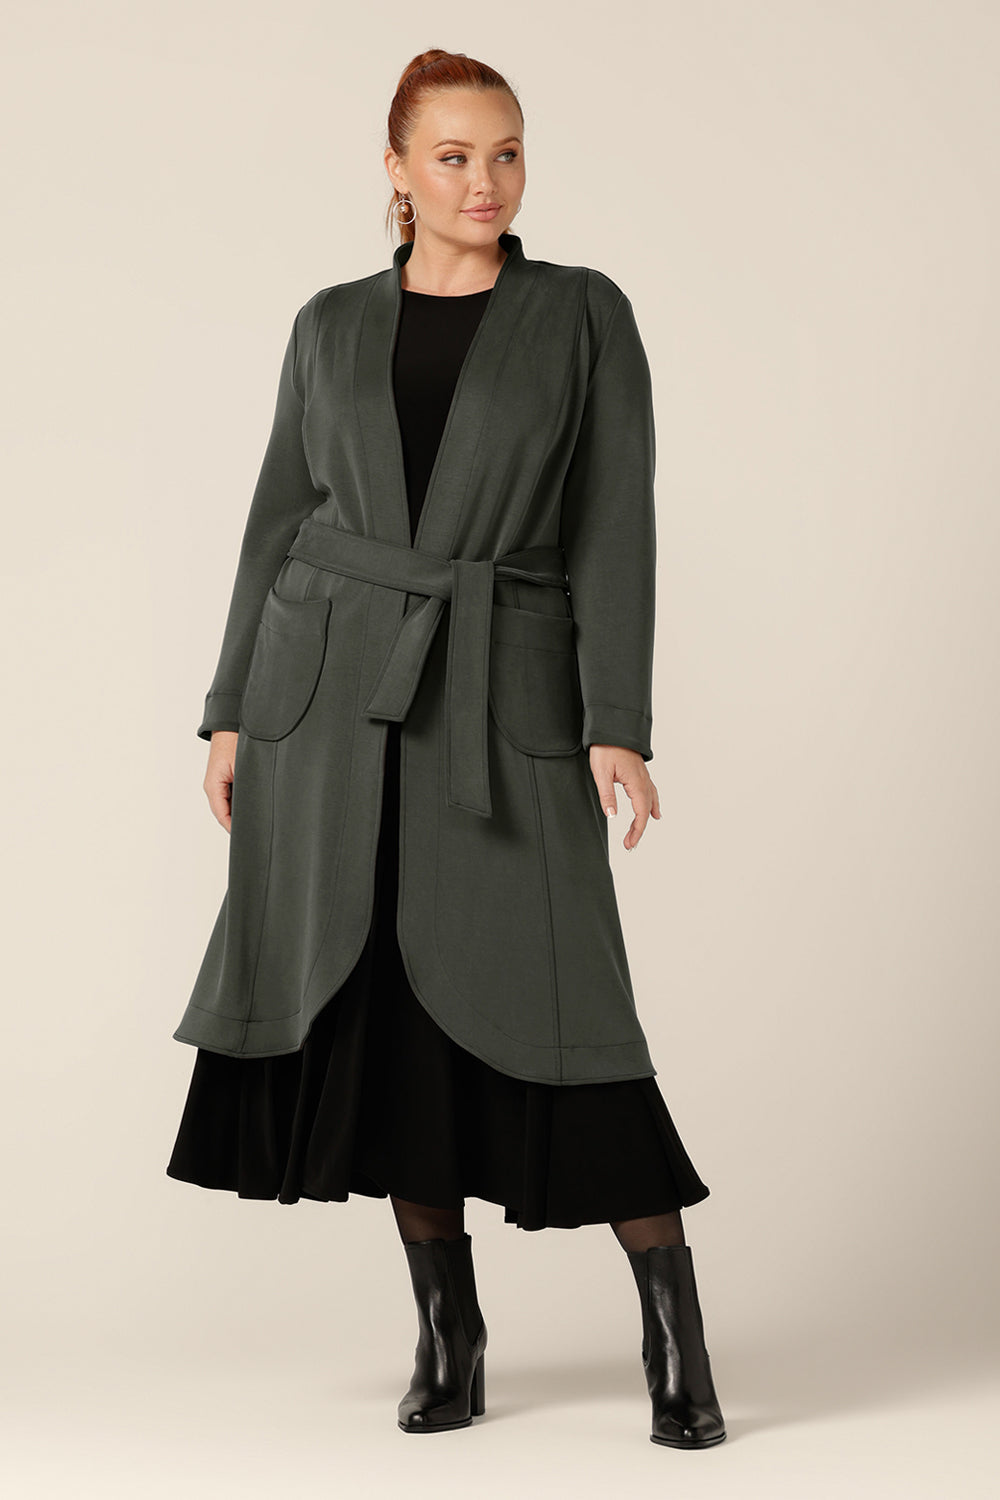 A classic winter coat for women, Marant Trenchcoat in Sage green by Australian and New Zealand women's clothing brand, L&F is shown in a size 12, and tied with a belt at the waist. A collarless, open fronted coat with tie belt and patch pockets, this classic green coat is avaiable to shop in an inclusive 8 to 24 size range.